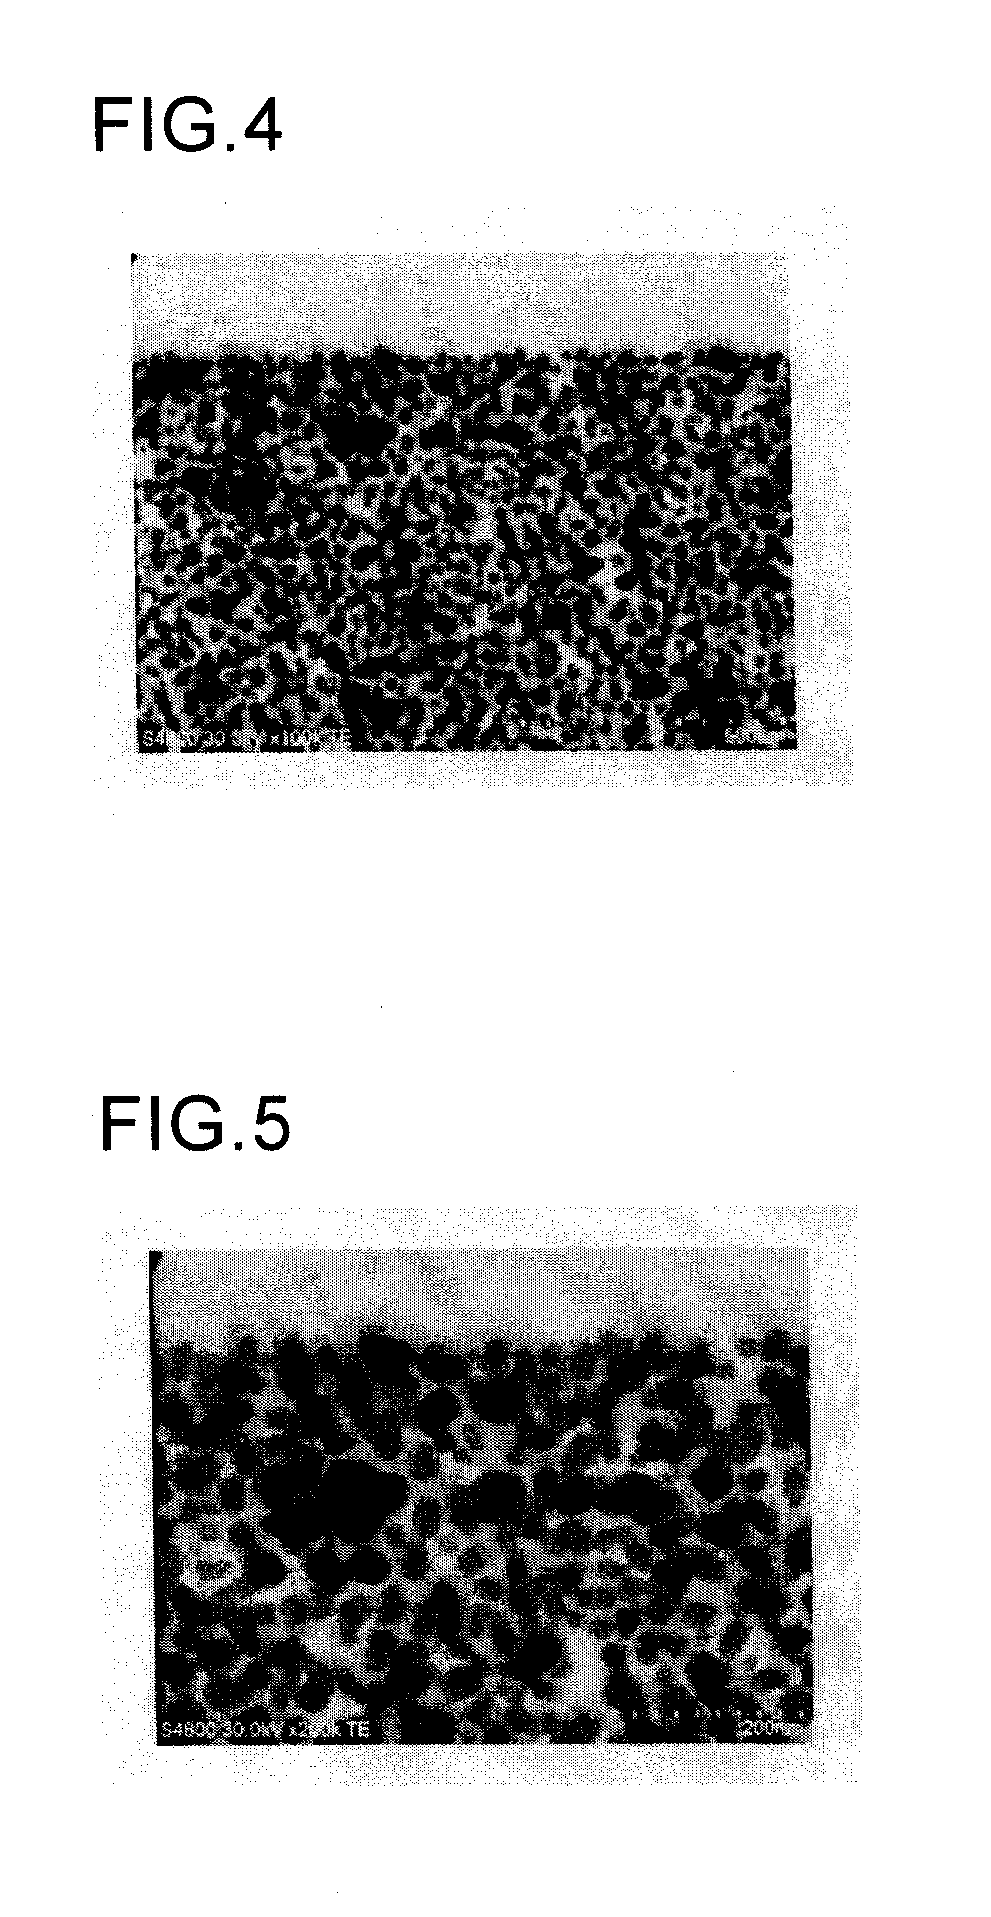 Optical sheet and method for producing the same